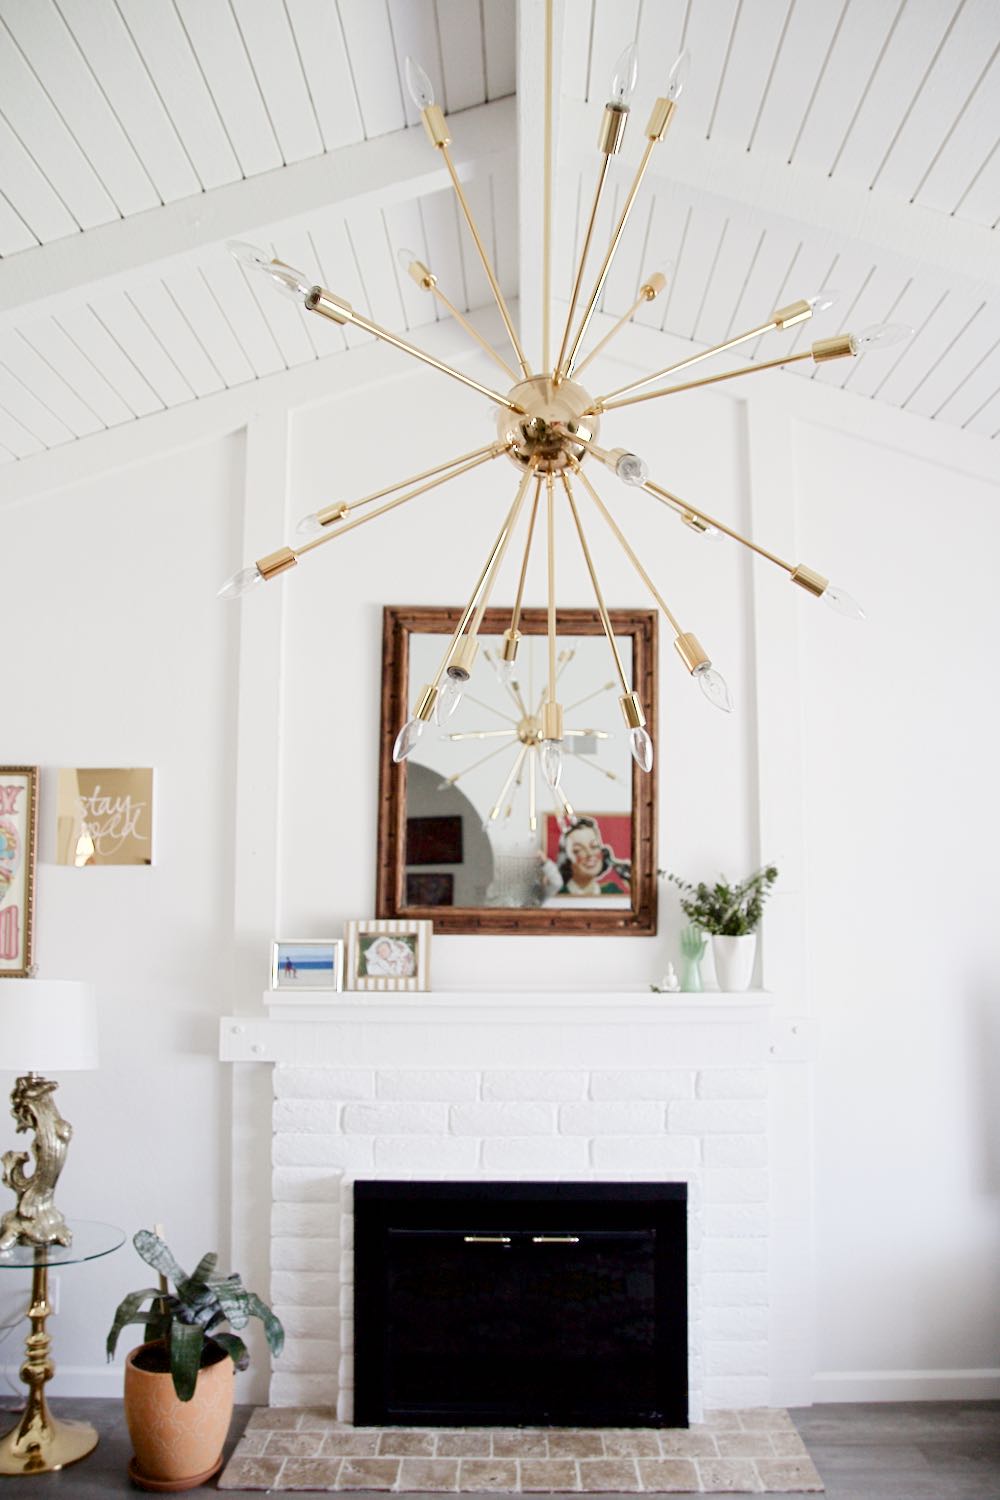 All white living room with exposed beams and sputnik chandelier